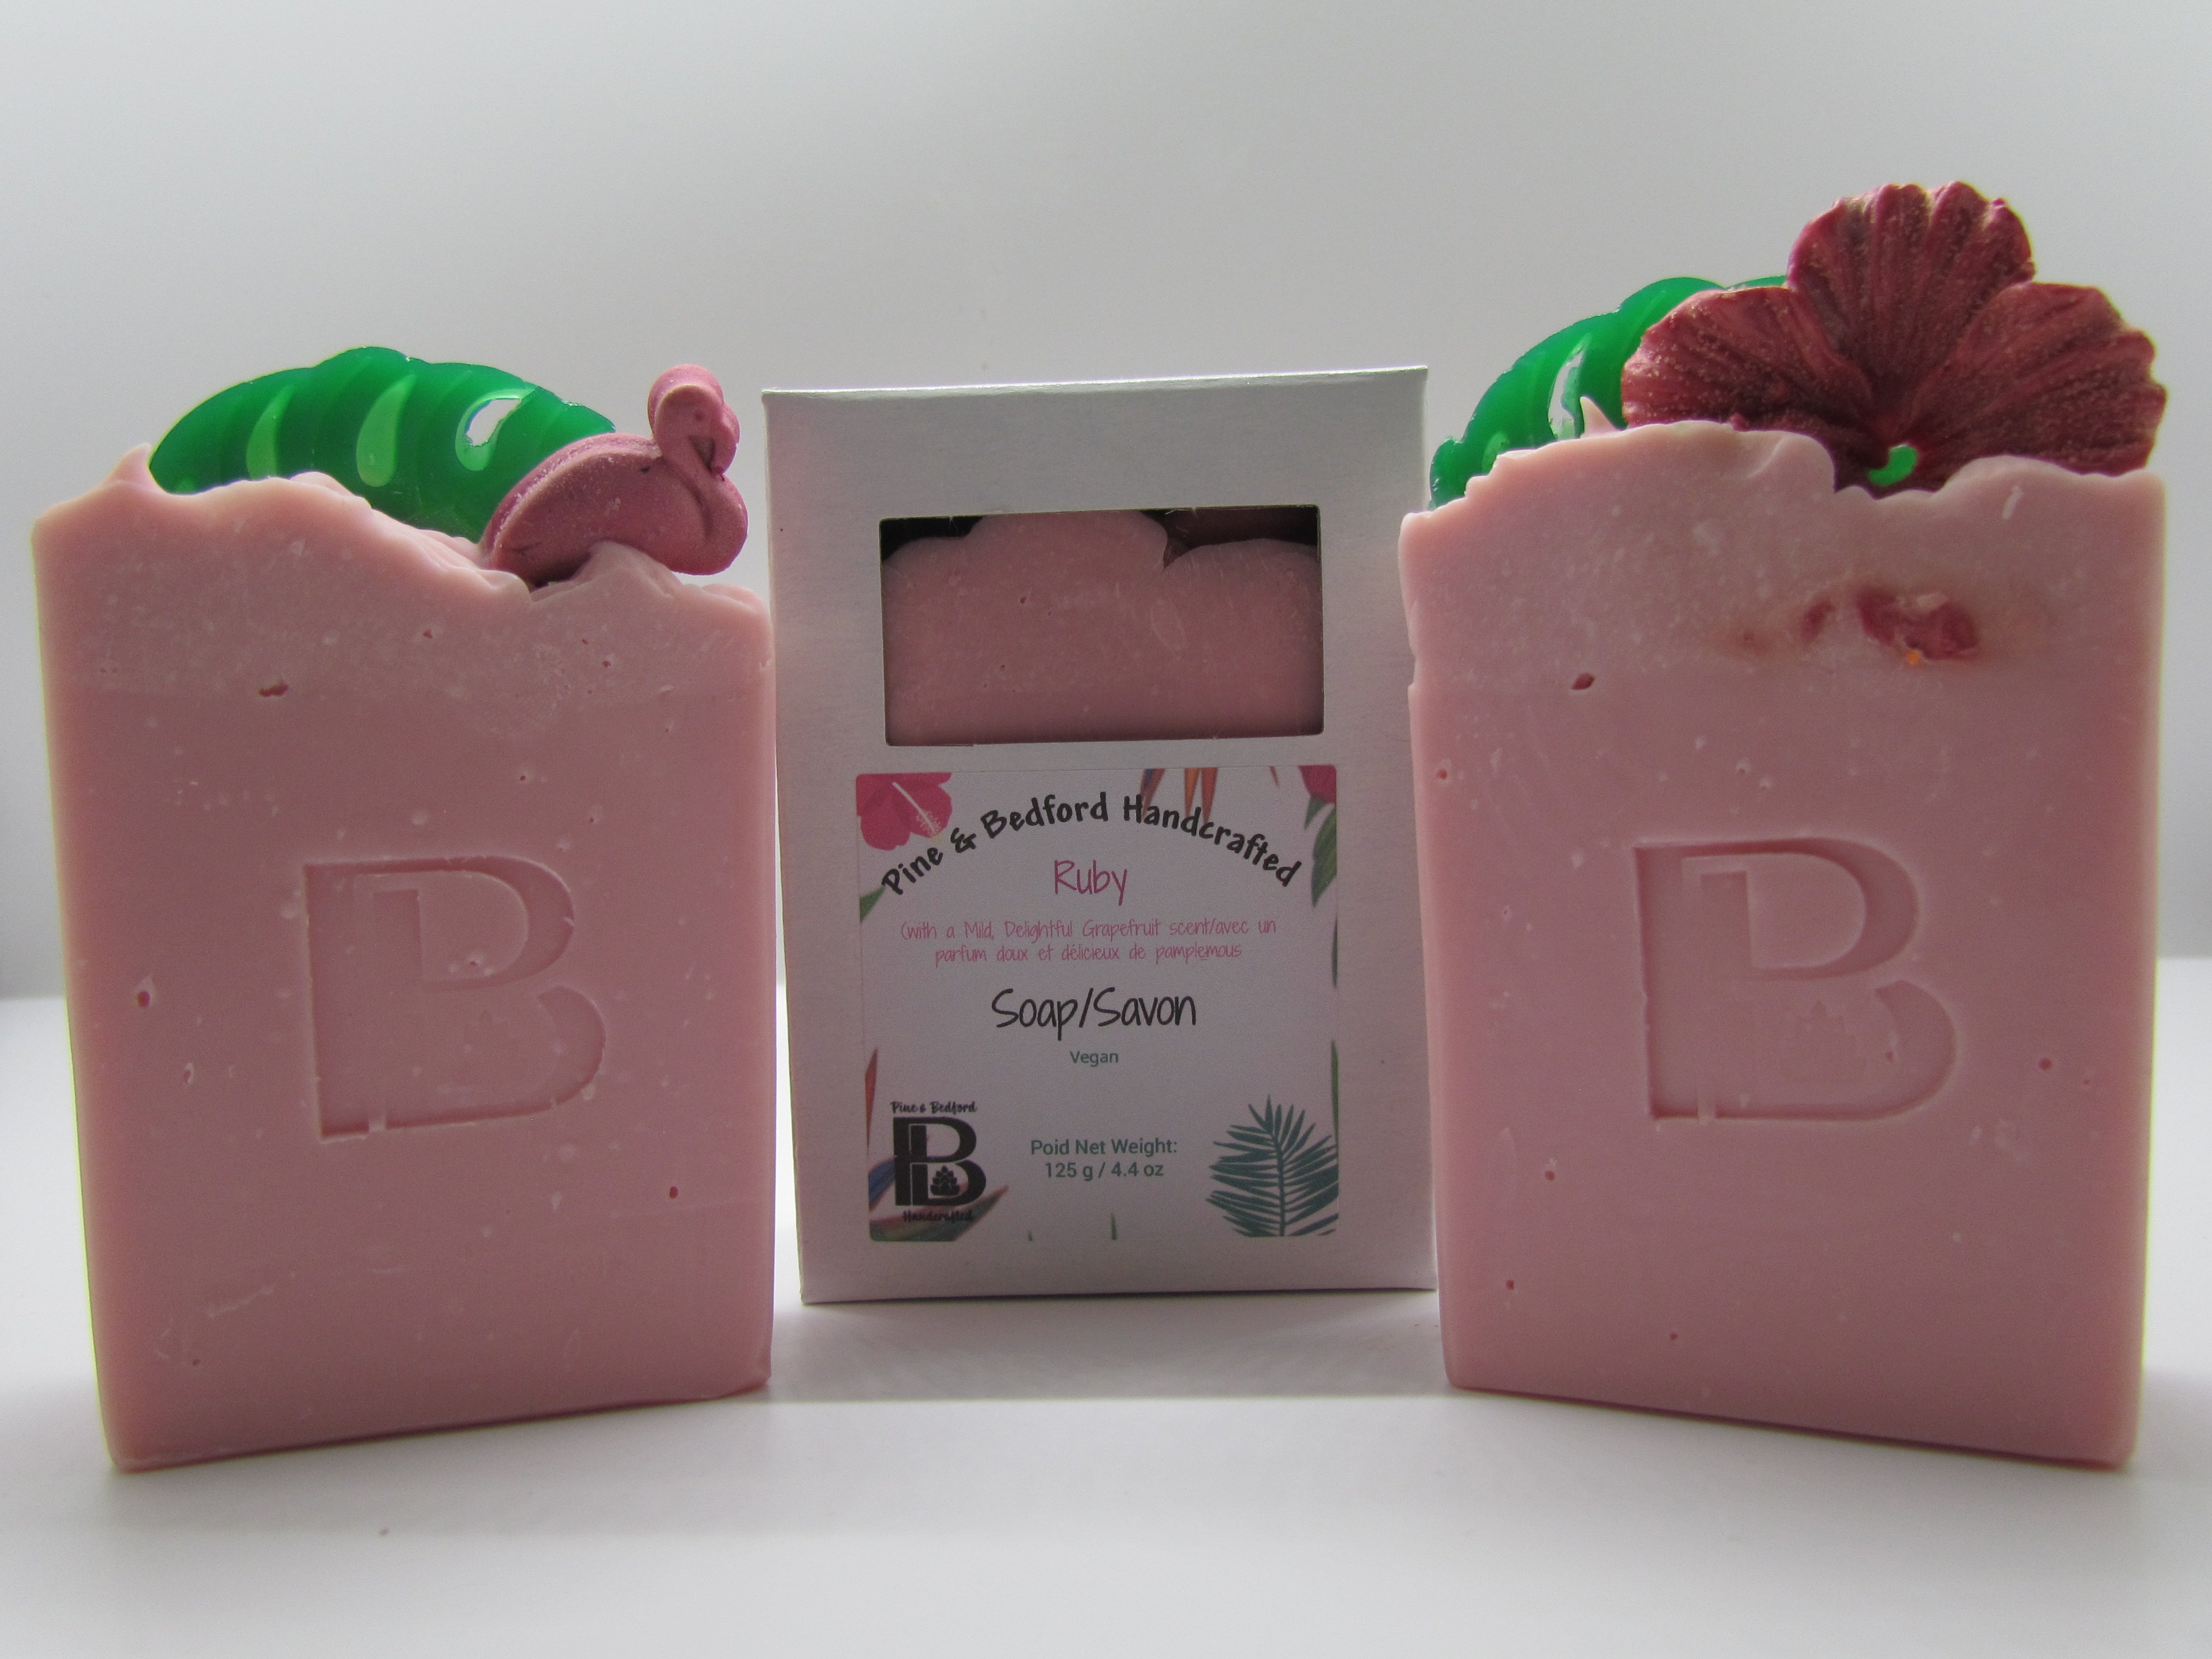 Pine & Bedford's Ruby soap is from our Luxurious Lather Collection. It is lightly fragrance with a fresh-grapefruit fragrance oil.  It is pink with top embellishments of green palm leaves and either a rosy hibiscus or pink flamingo.  Shown naked and boxed.